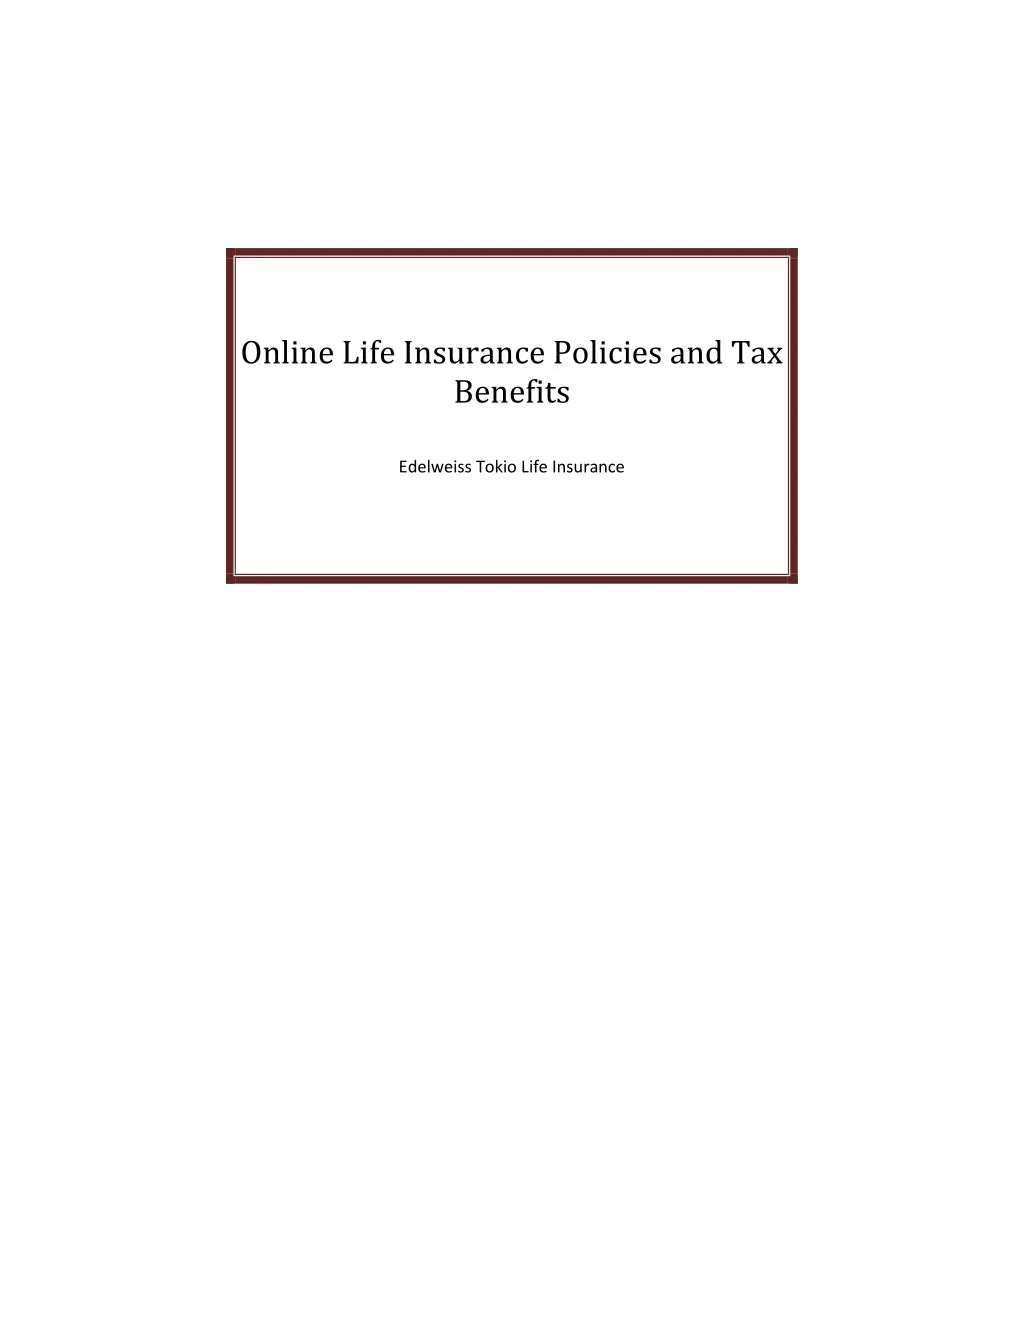 online life insurance policies and tax benefits